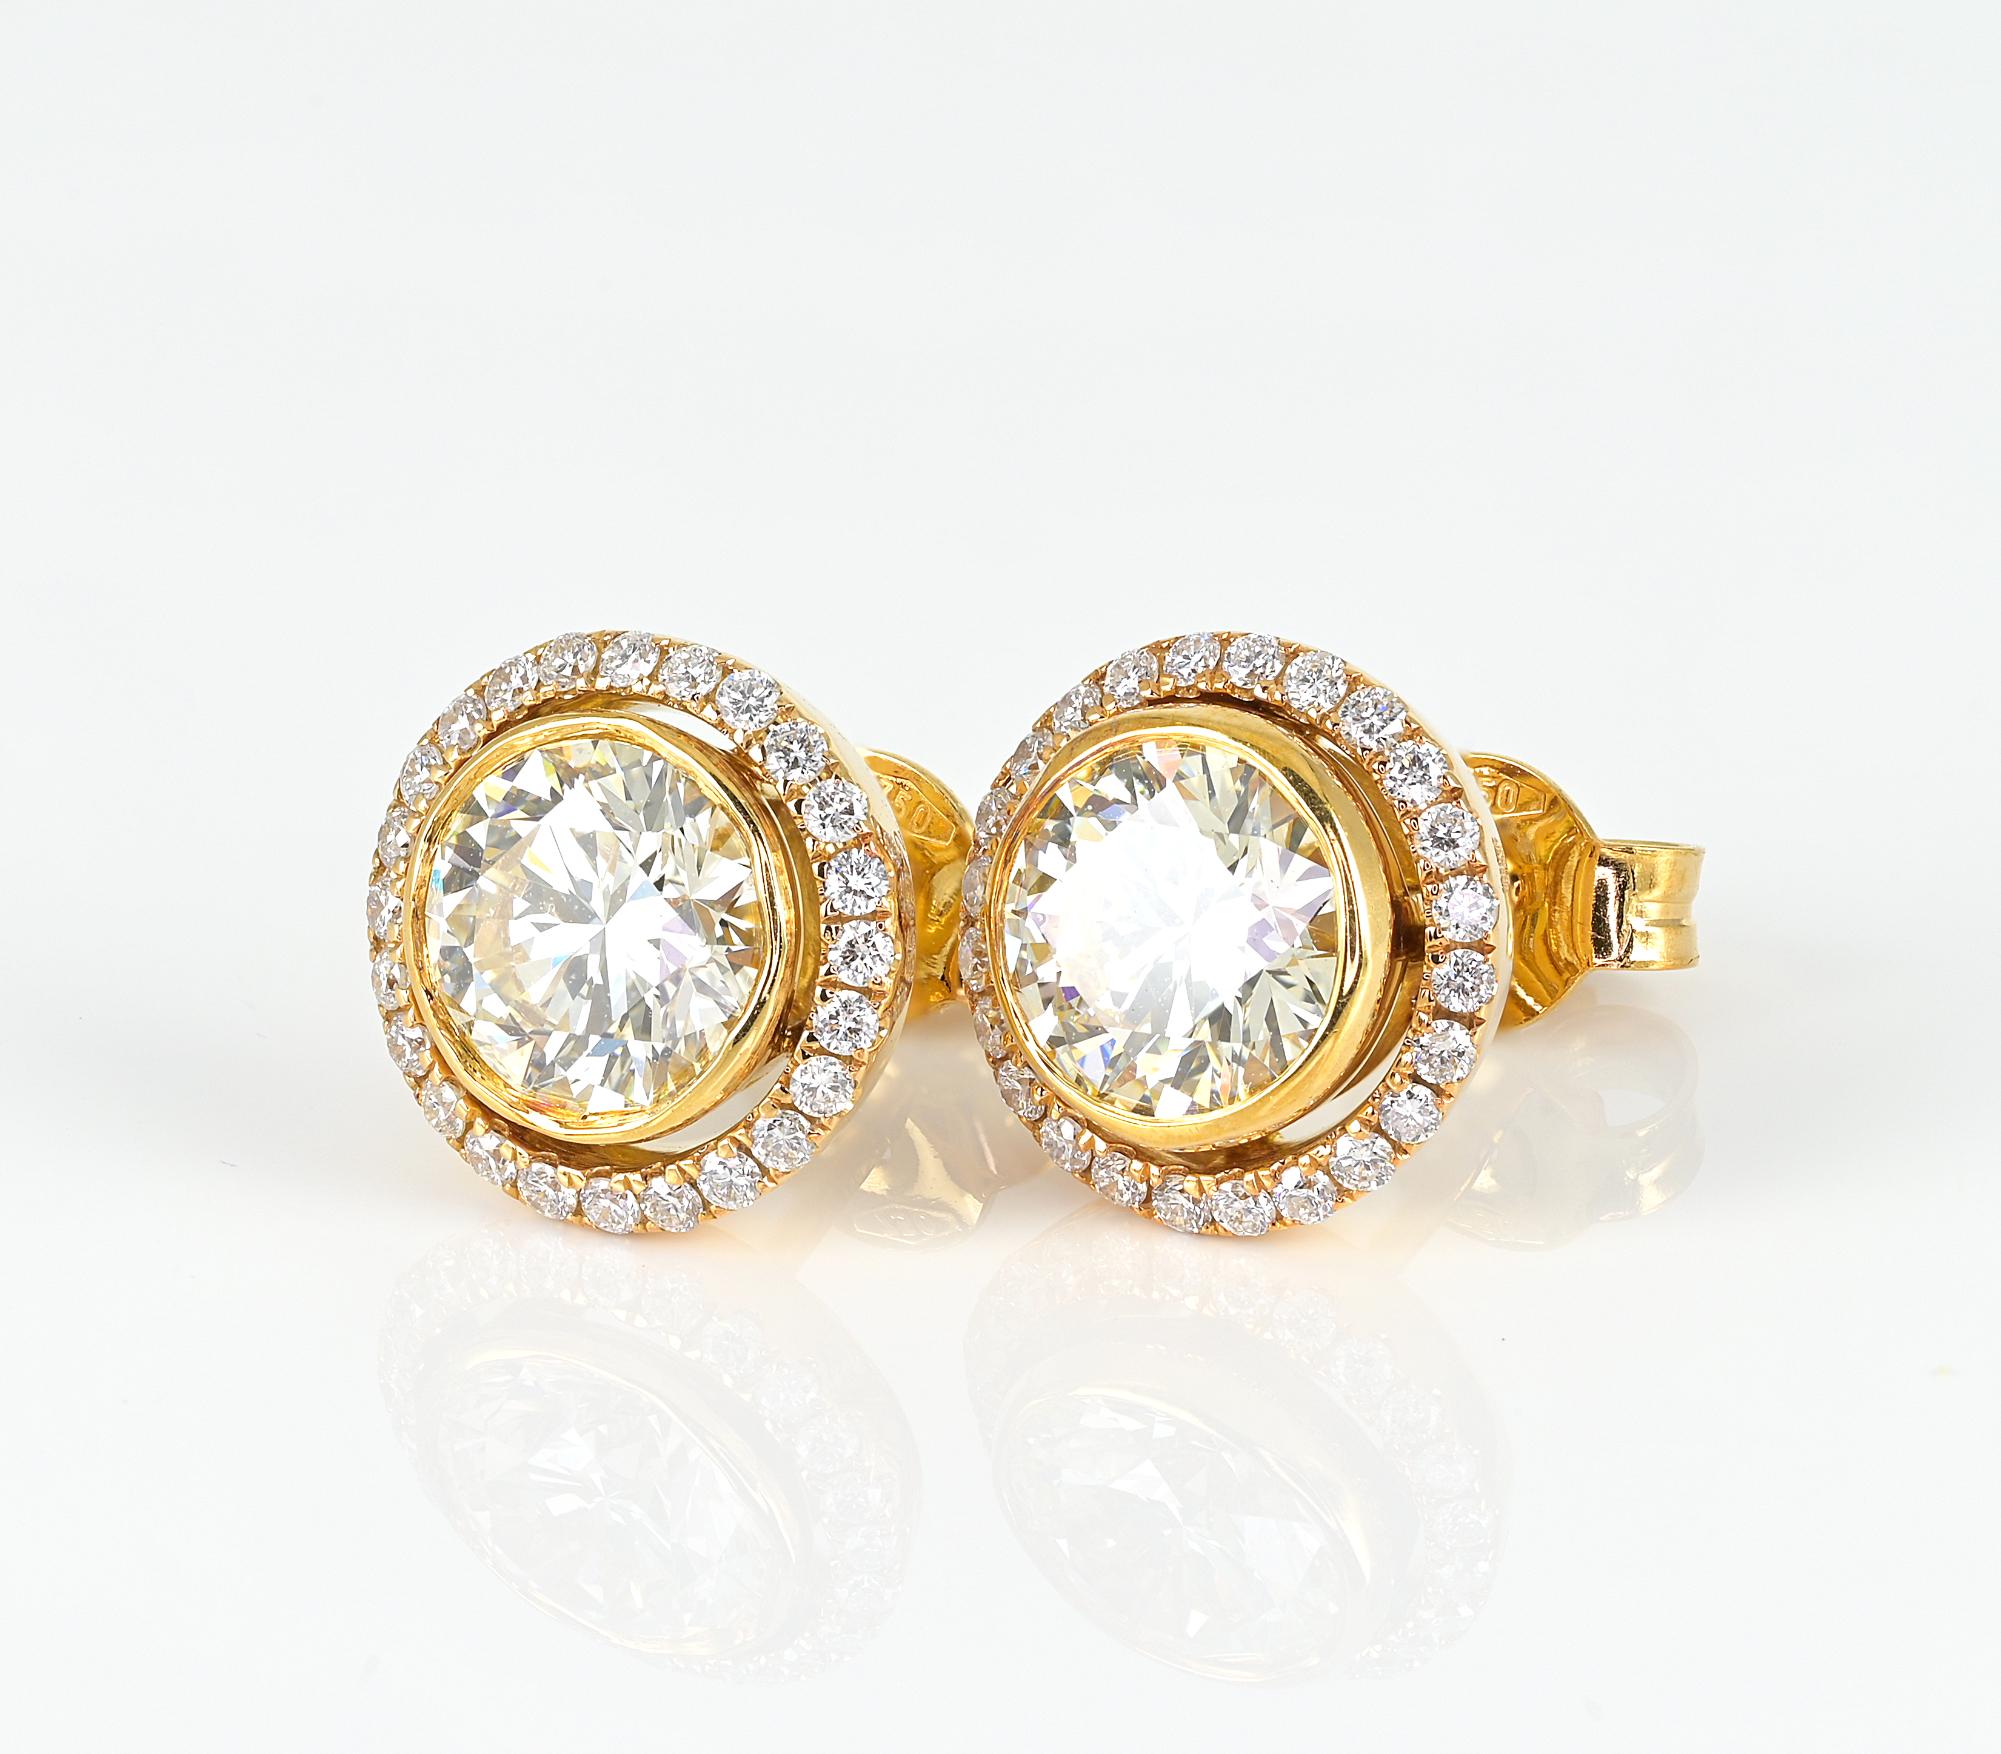 Contemporary 2.08 Ct Diamond Solitaire Target Stud Earrings 18 KT gold For Sale